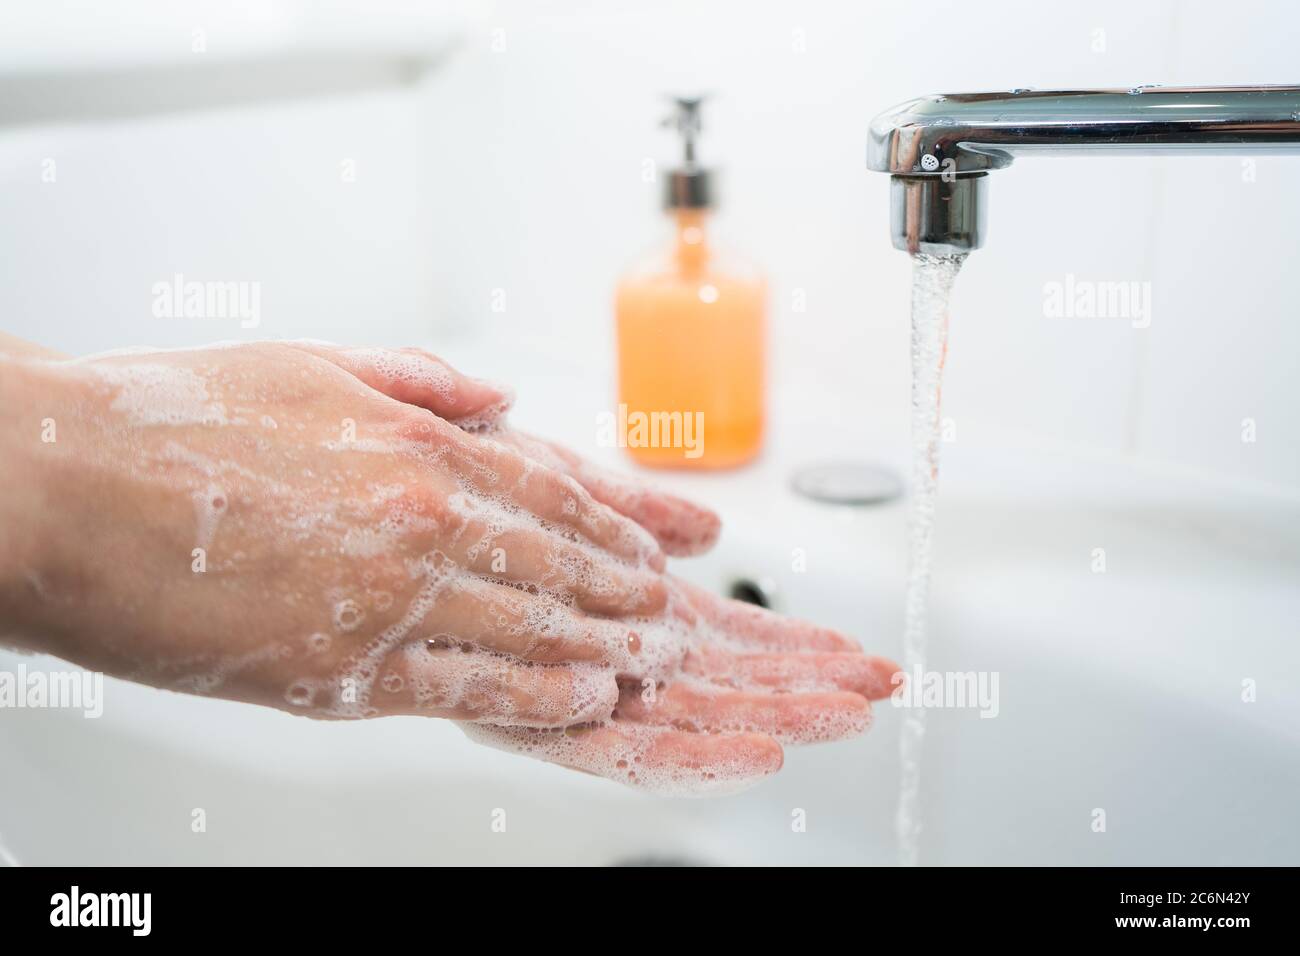 Hand washing with soap. Girl washes her hands with antibacterial soap  Stock Photo